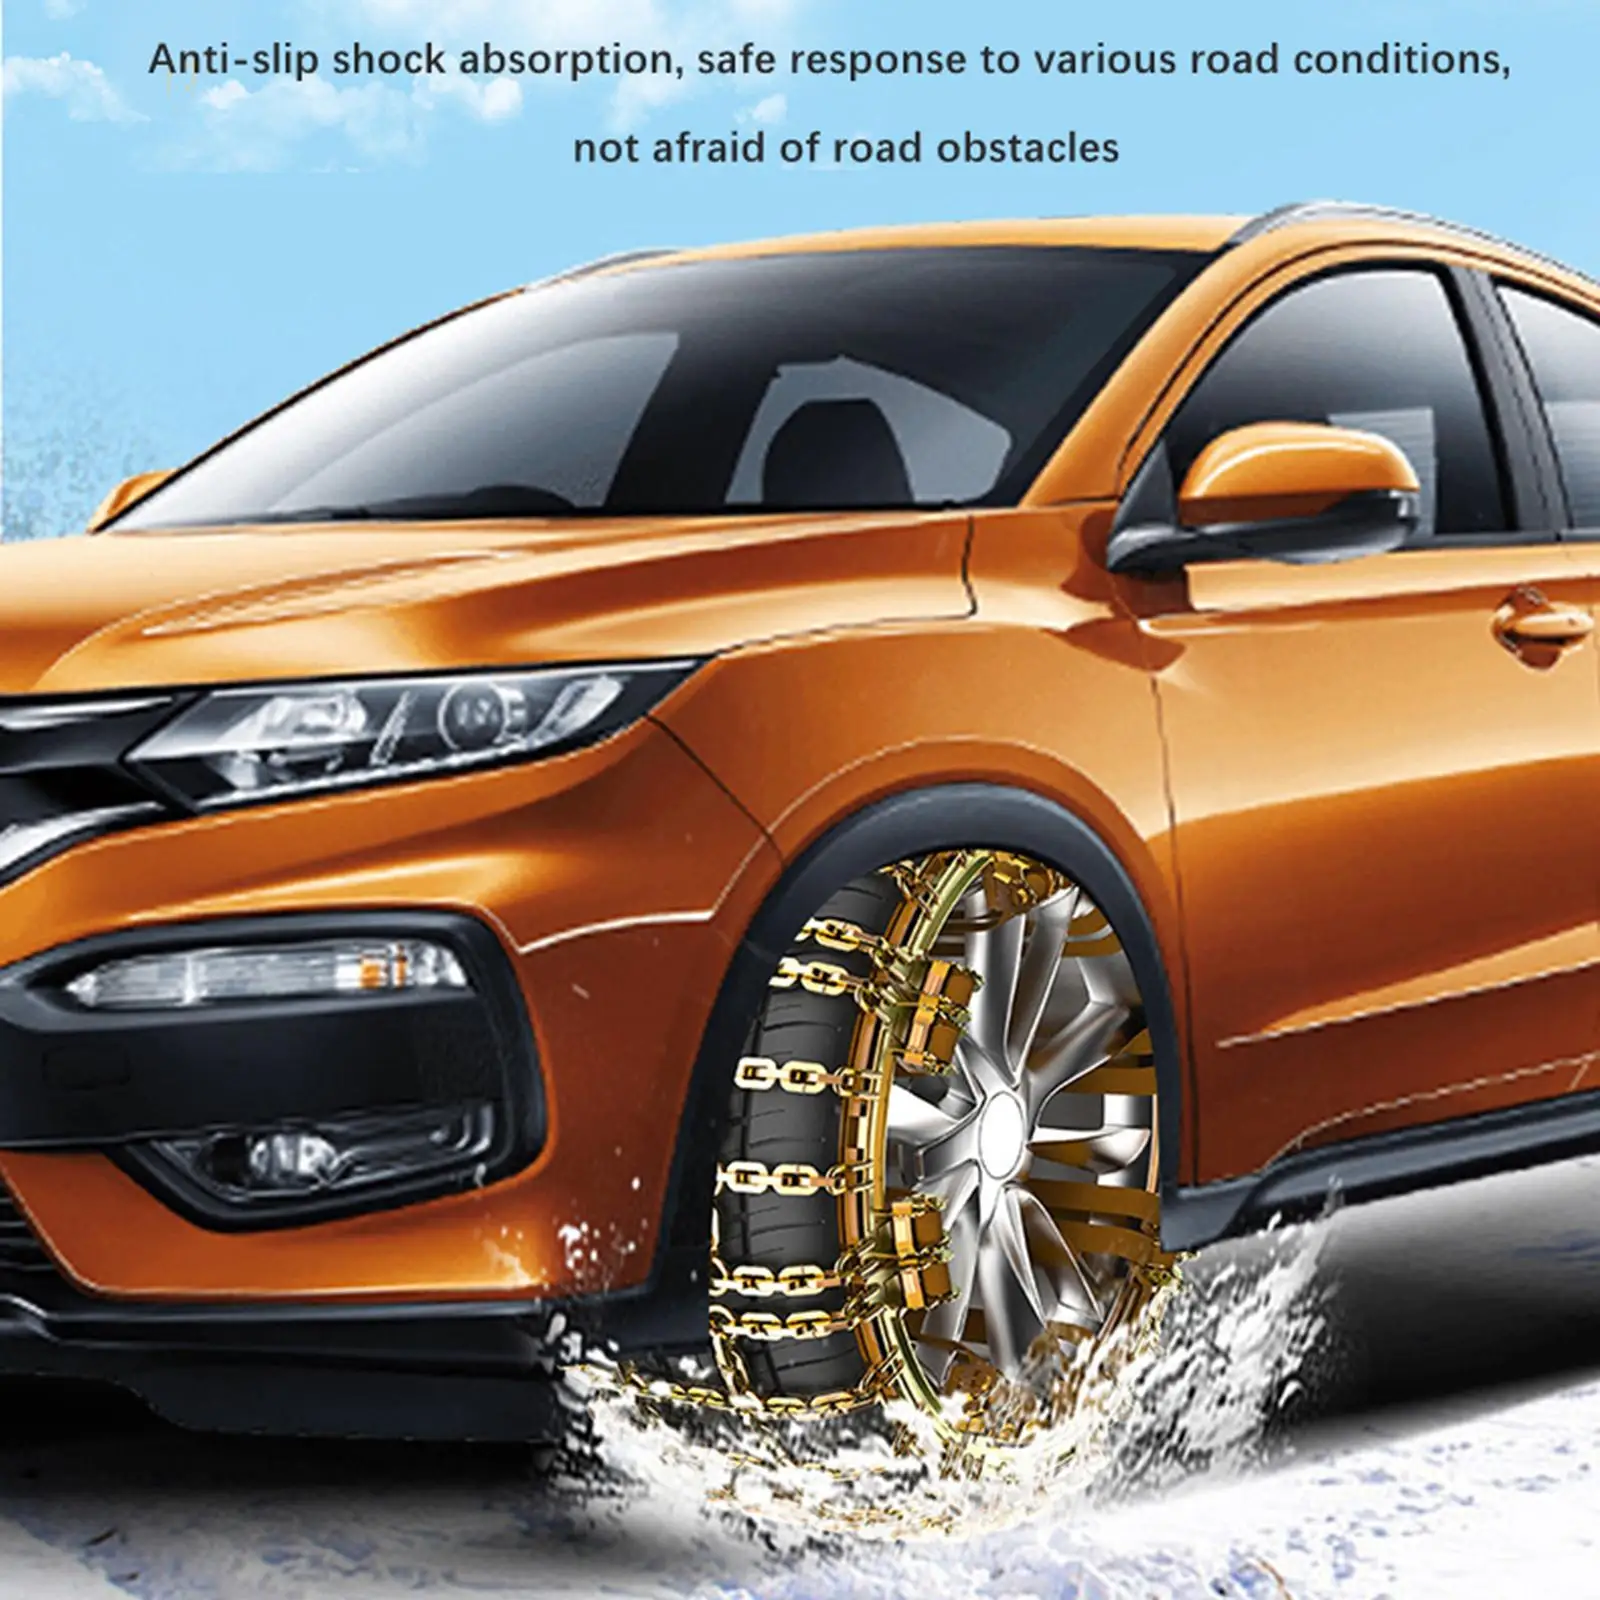 Snow Chain Reusable Car Tire Chain Snow and Ice for Cars Pickups Trucks